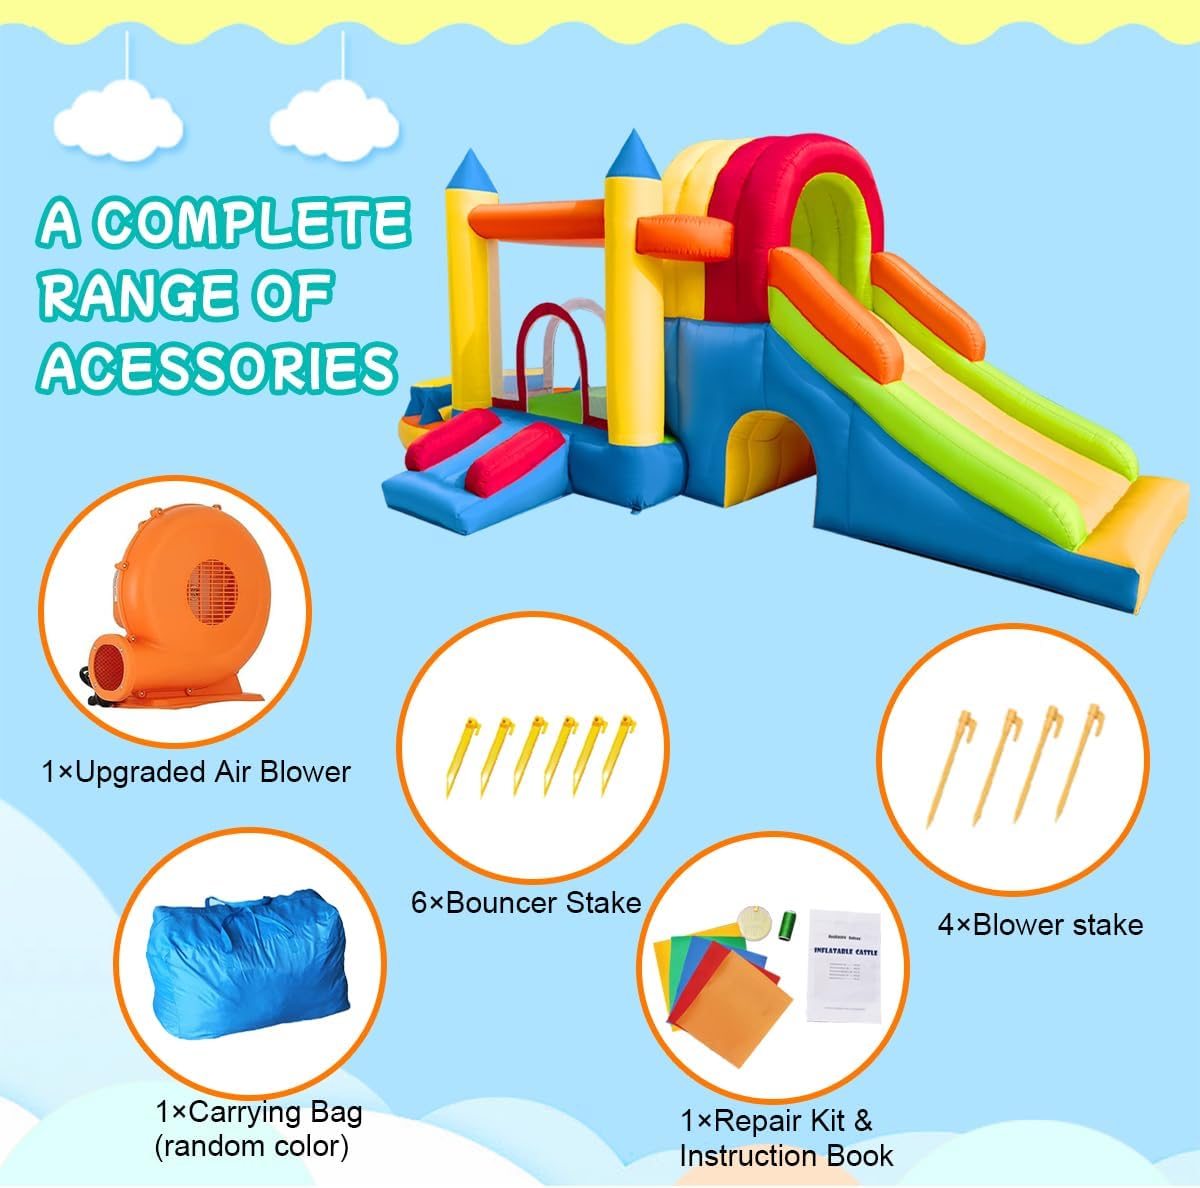 Baralir Inflatable Bouncy Castle, 8 in 1 Large Bounce House with Blower for Kids and Toddlers, Outdoor Indoor Backyard Inflatable Bouncers with Two Slides